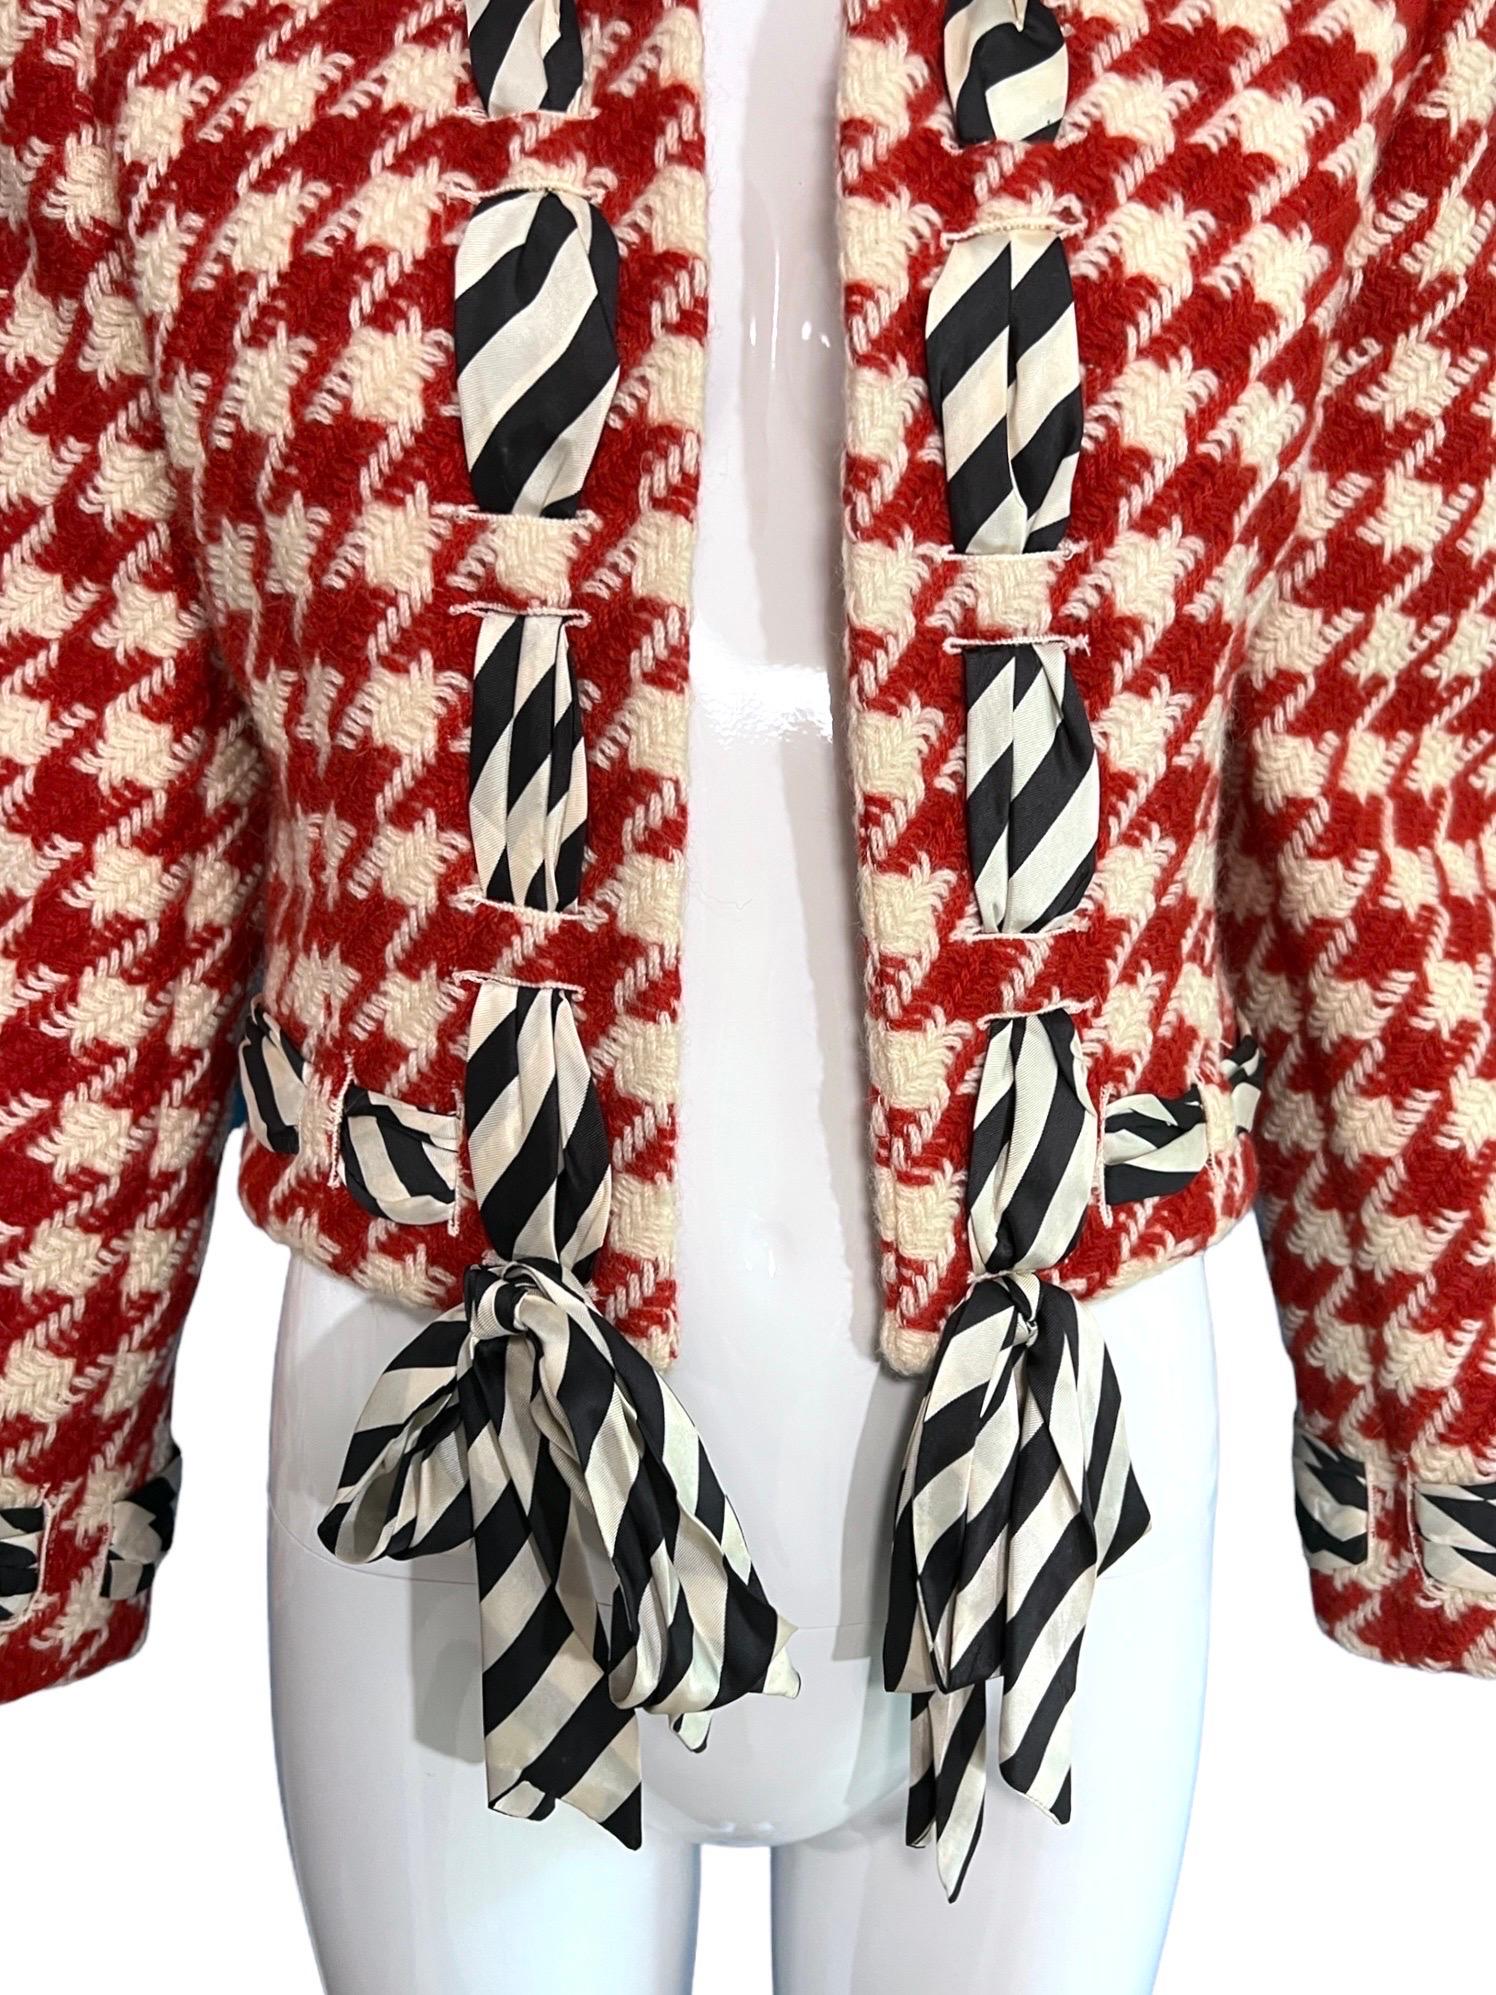 Women's Moschino Cheap and Chic Vintage Houndstooth Jacket as seen on Princess Diana